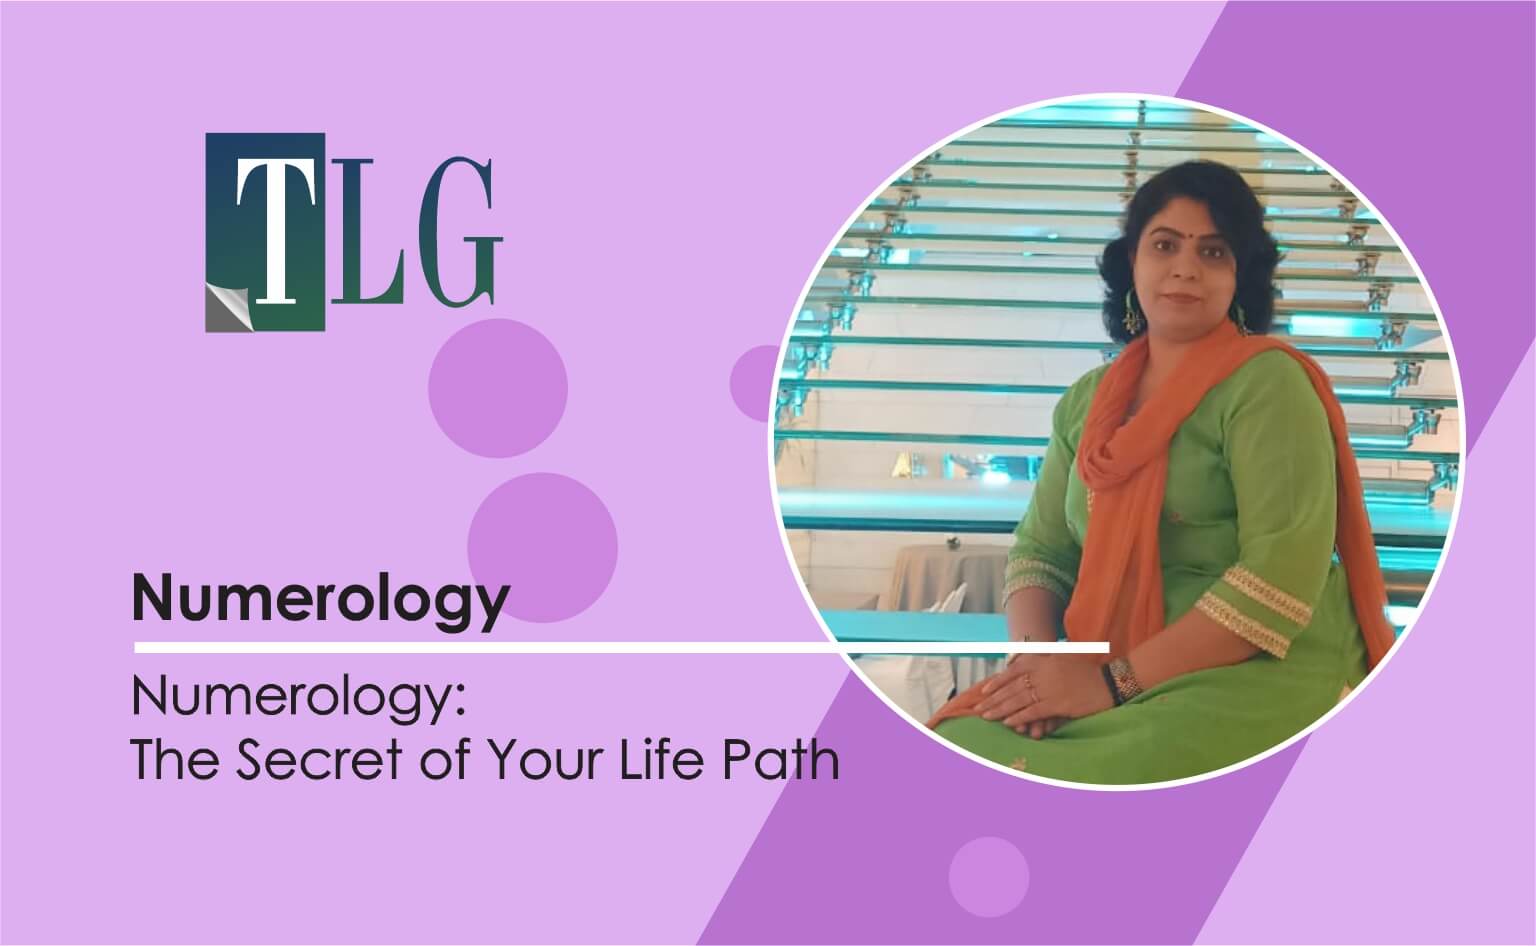 The Secret of Your Life Path- numerology